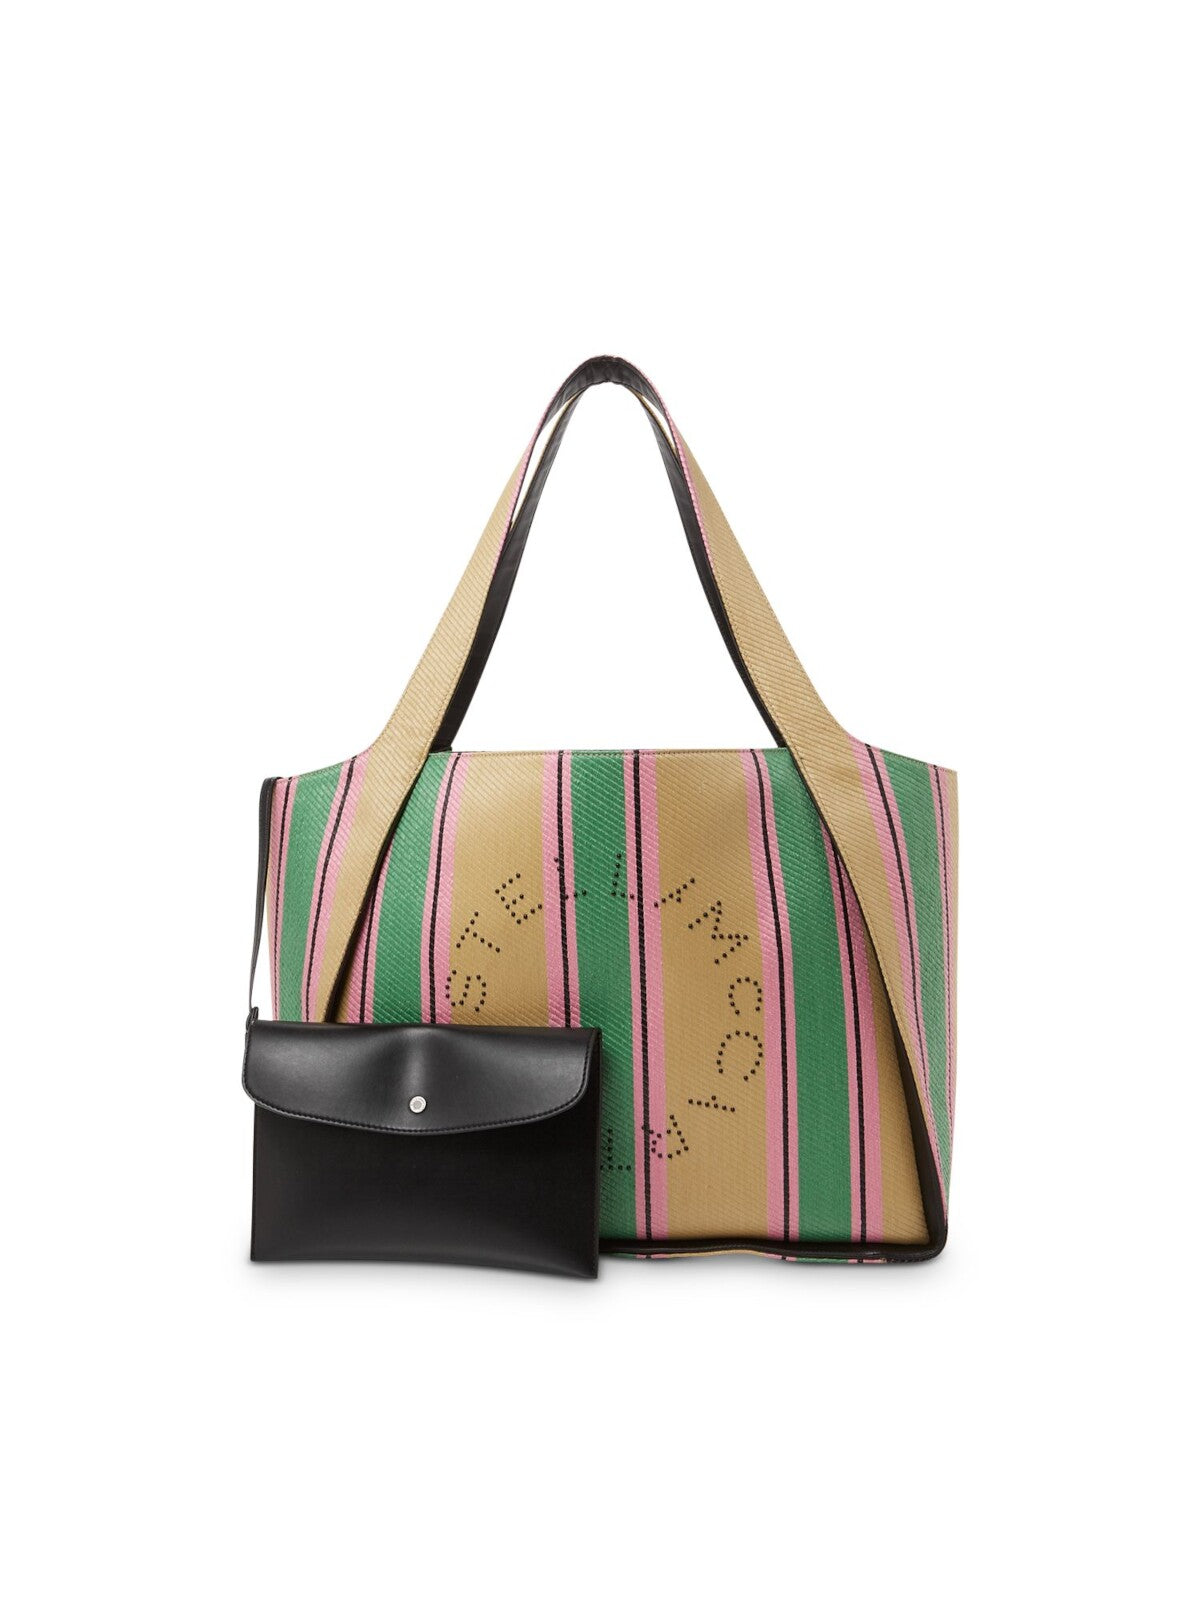 STELLAMCCARTNEY Women's Green Striped Removable Pouch Included Logo Double Flat Strap Tote Handbag Purse